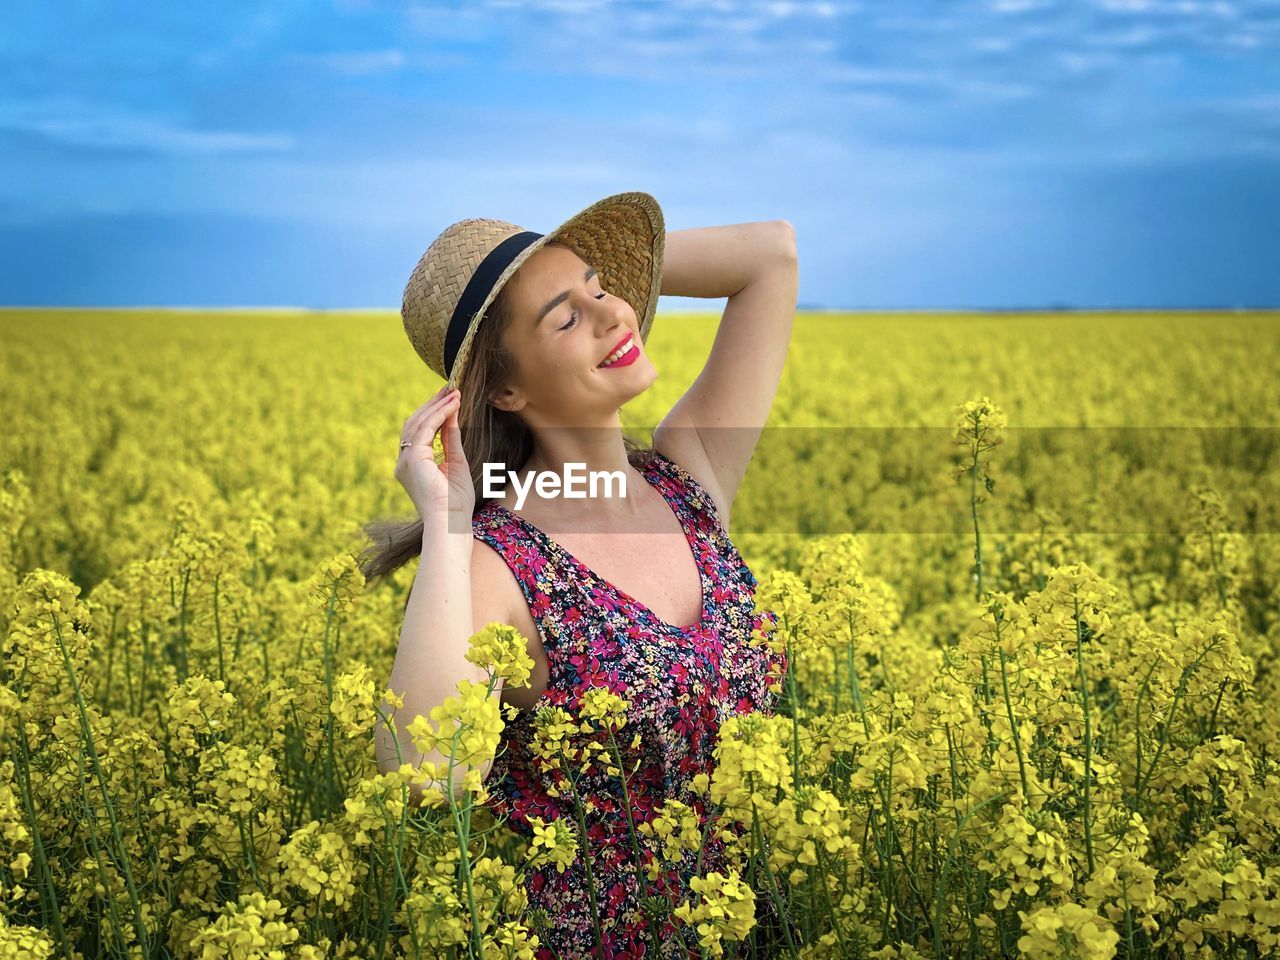 Portrait of young woman wearing dress and sun hat in a field of canola flowers on a cloudy day